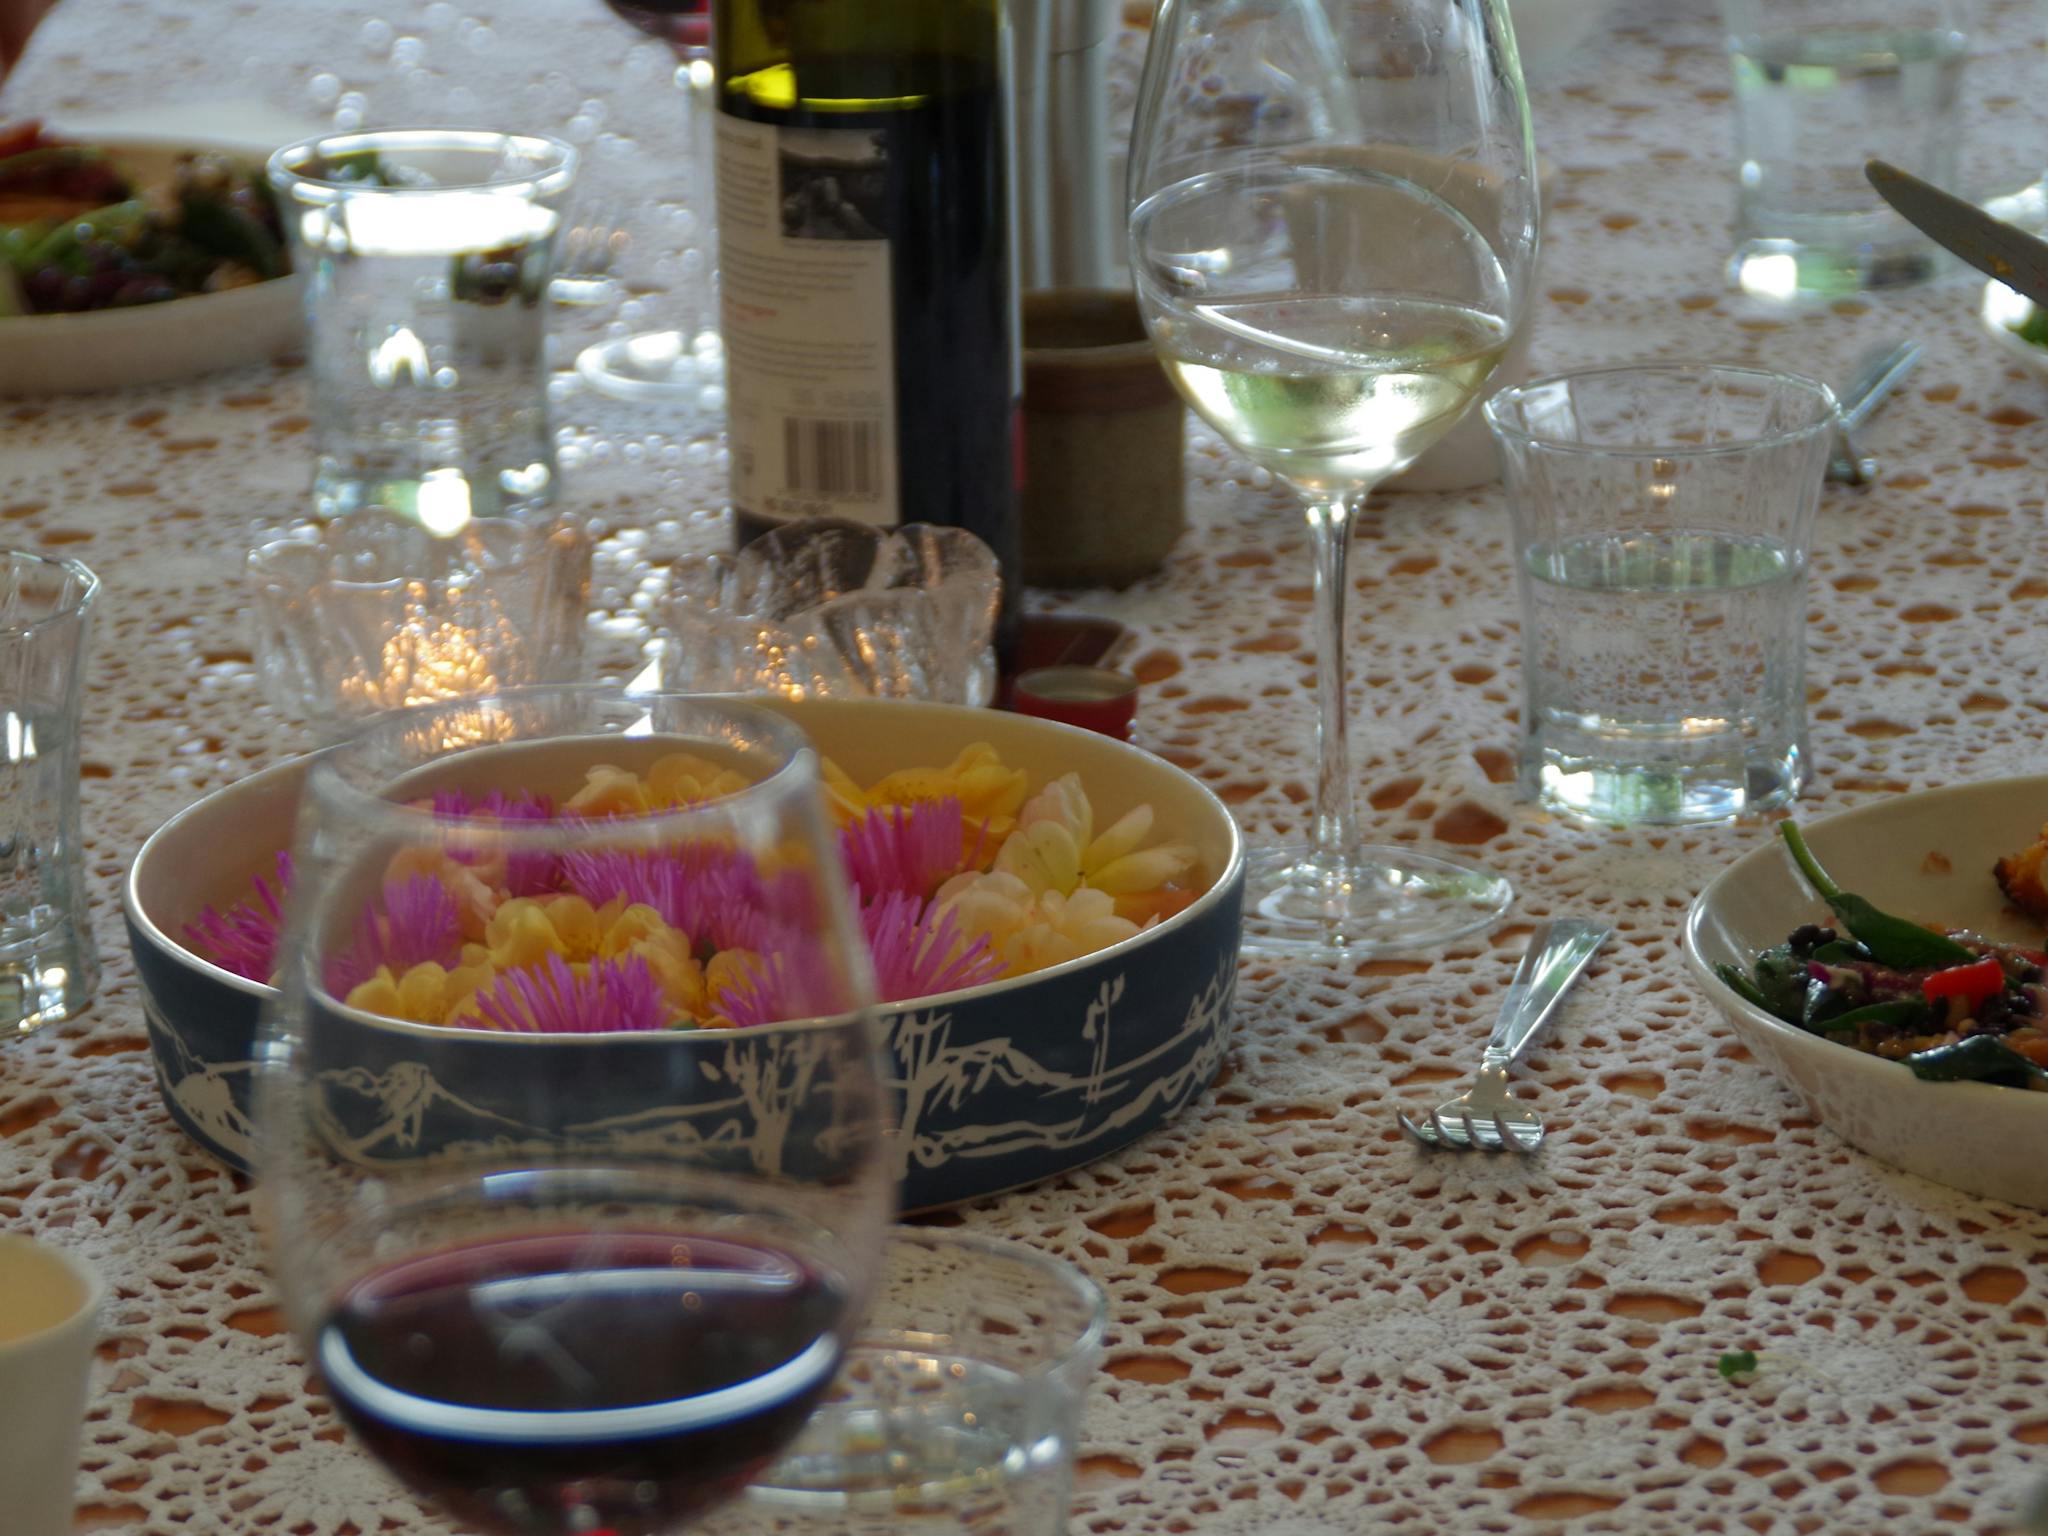 A table set with plates, glasses and food